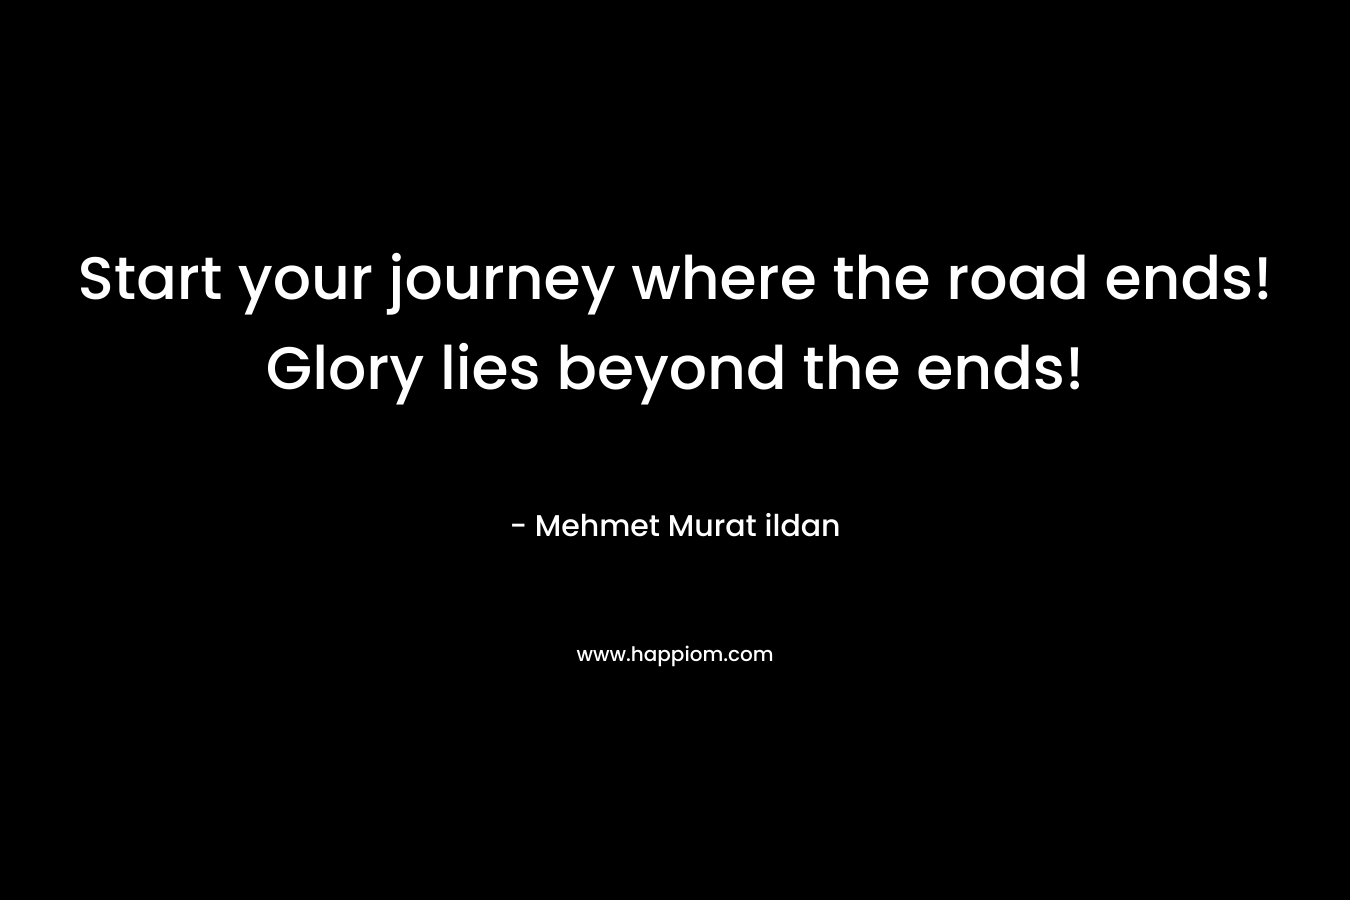 Start your journey where the road ends! Glory lies beyond the ends!